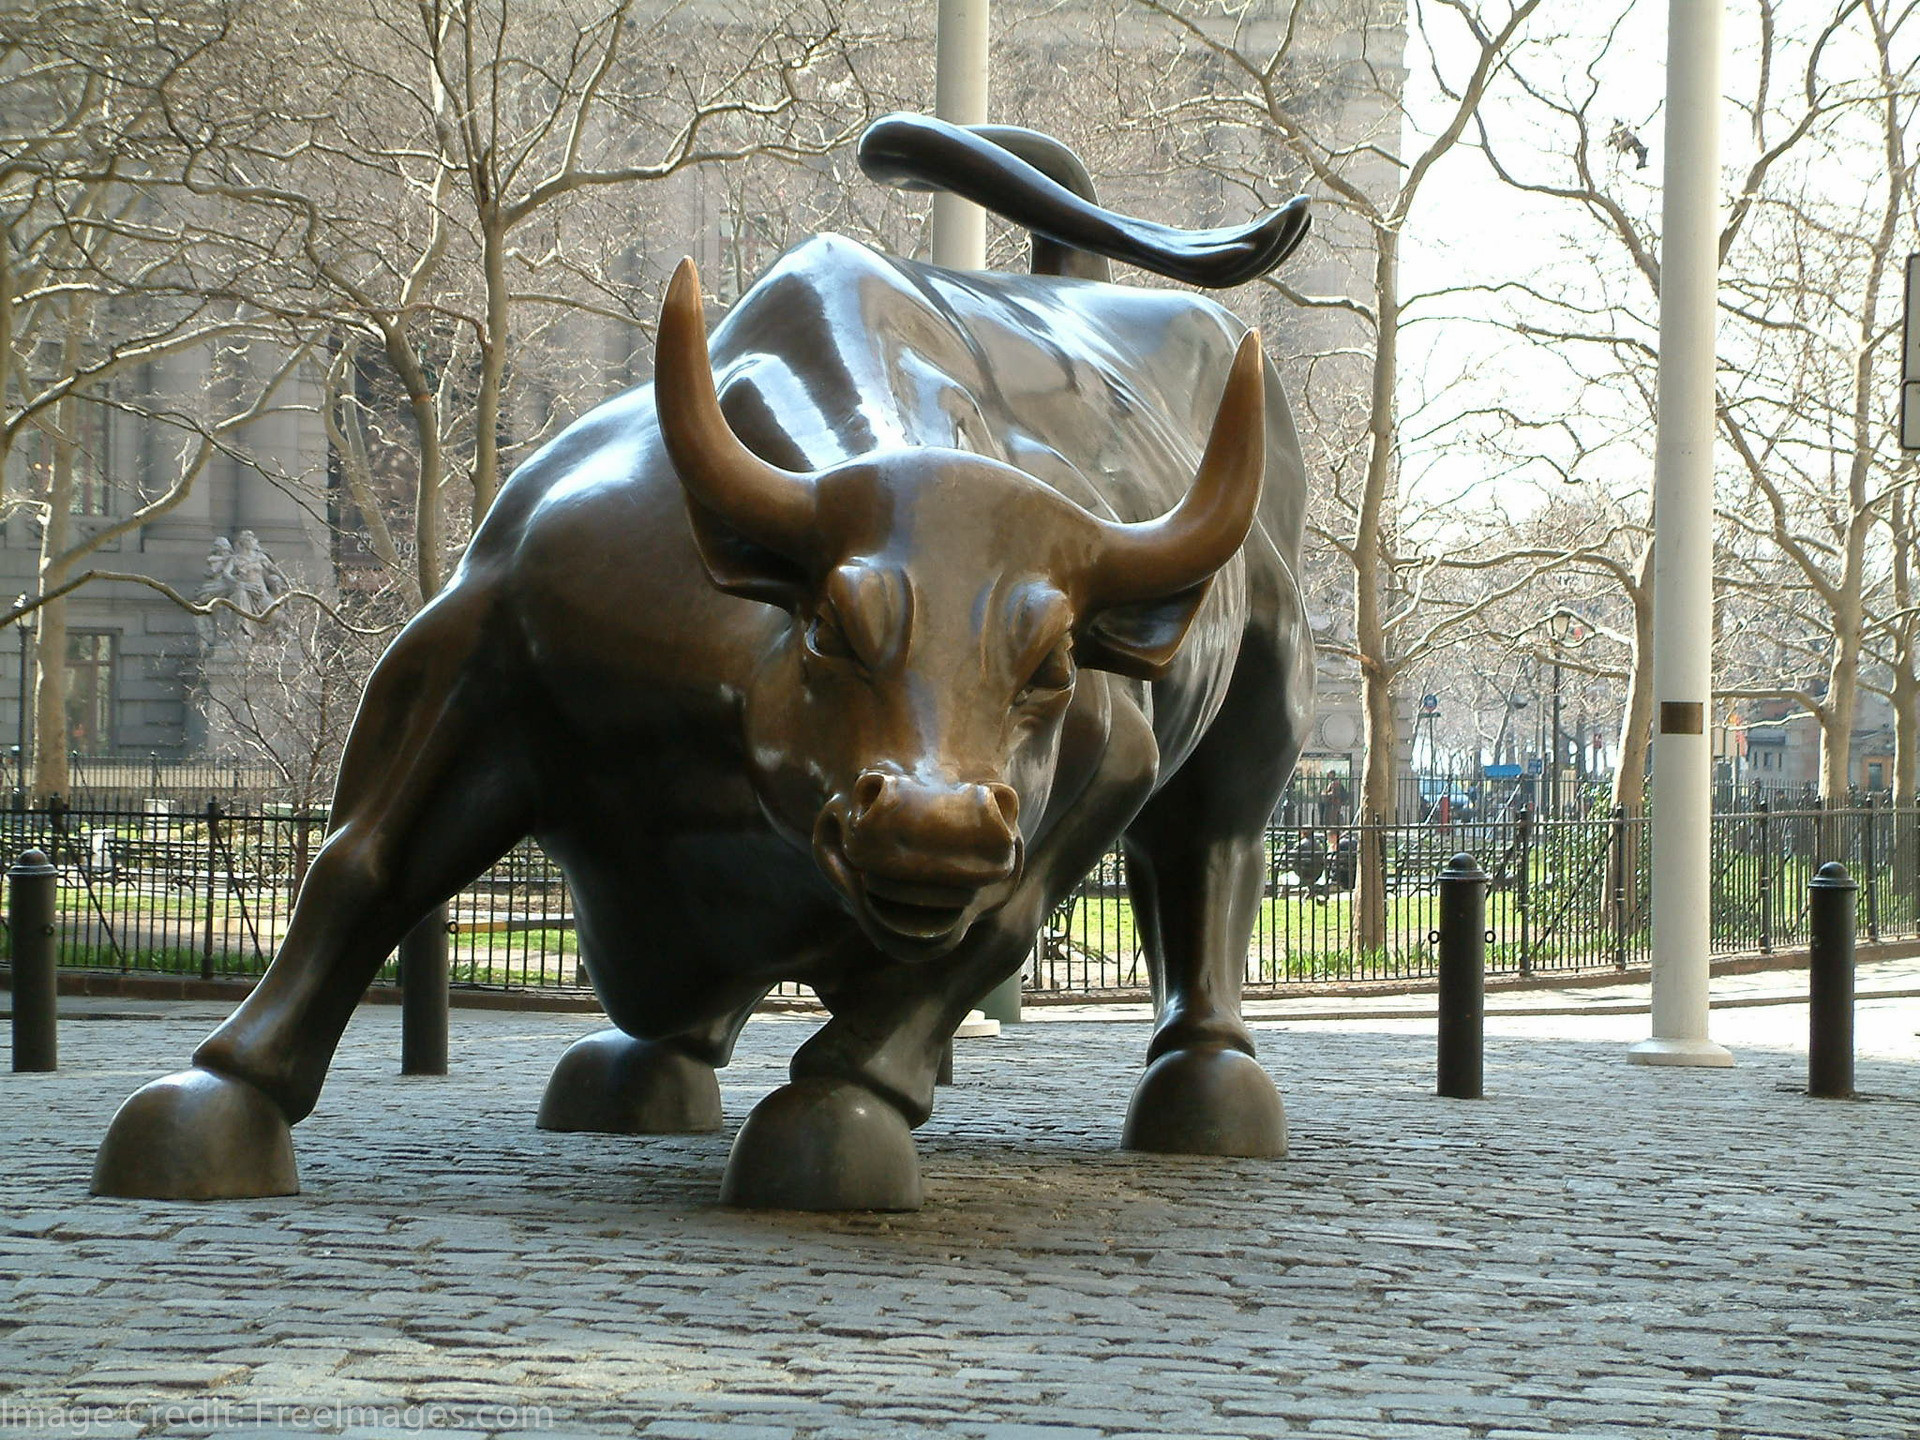 1920x1440 Wall Street S Bull Sculptor Threatens To Sue Over Statue